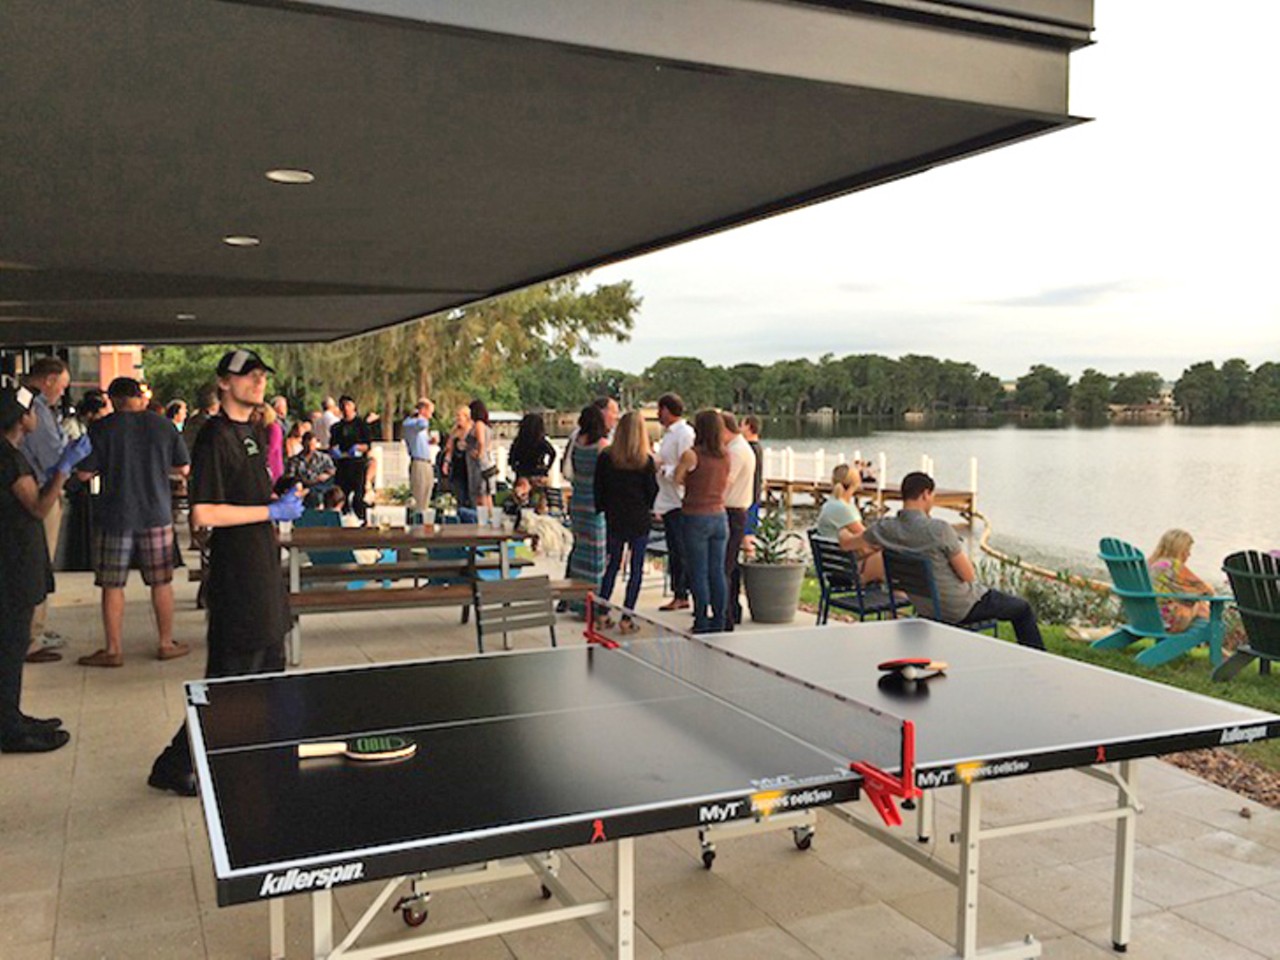 Shake Shack 
119 N Orlando Ave., Winter Park FL 32789, 321-203-5130
Located along Lake Killarney, this is the first of its New York City-based chain to open in Central Florida. Not only can you chow down a burger on their patio on the lake, but you can play ping-pong and relax around their fire pit to mourn all the calories you just inhaled. And their prices aren&#146;t half-bad either, so there&#146;s that too.
Photo via Orlando Weekly